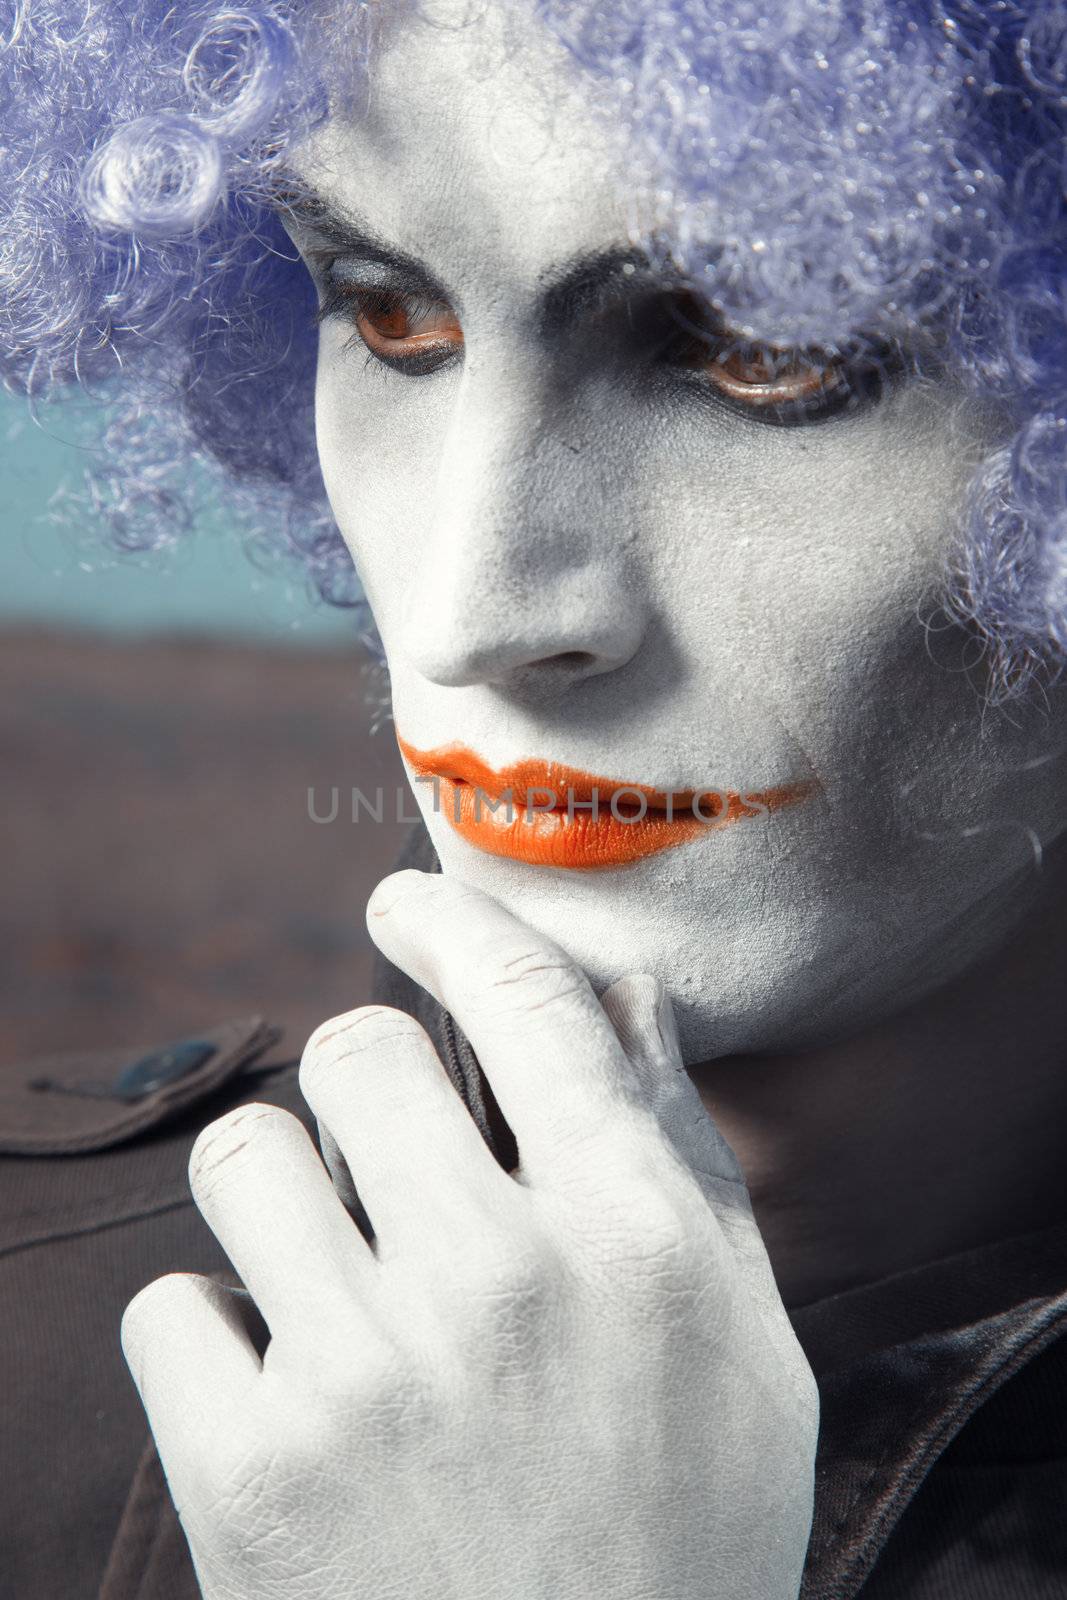 Single sad funny man with theatrical makeup and wig